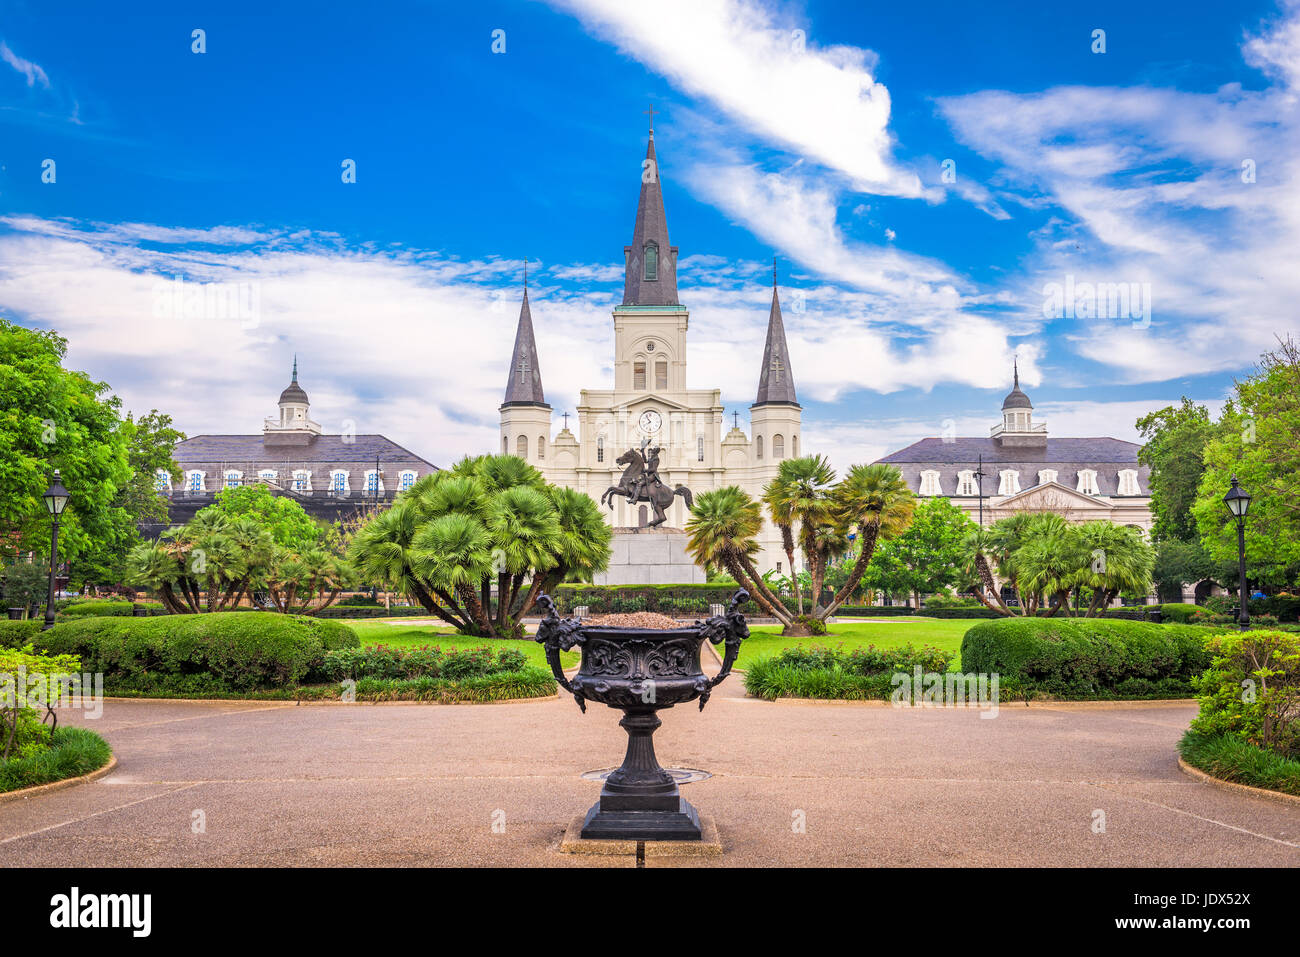 New Orleans, Louisiana, USA at St. Louis Cathedral and Jackson Stock Photo: 146248226 - Alamy